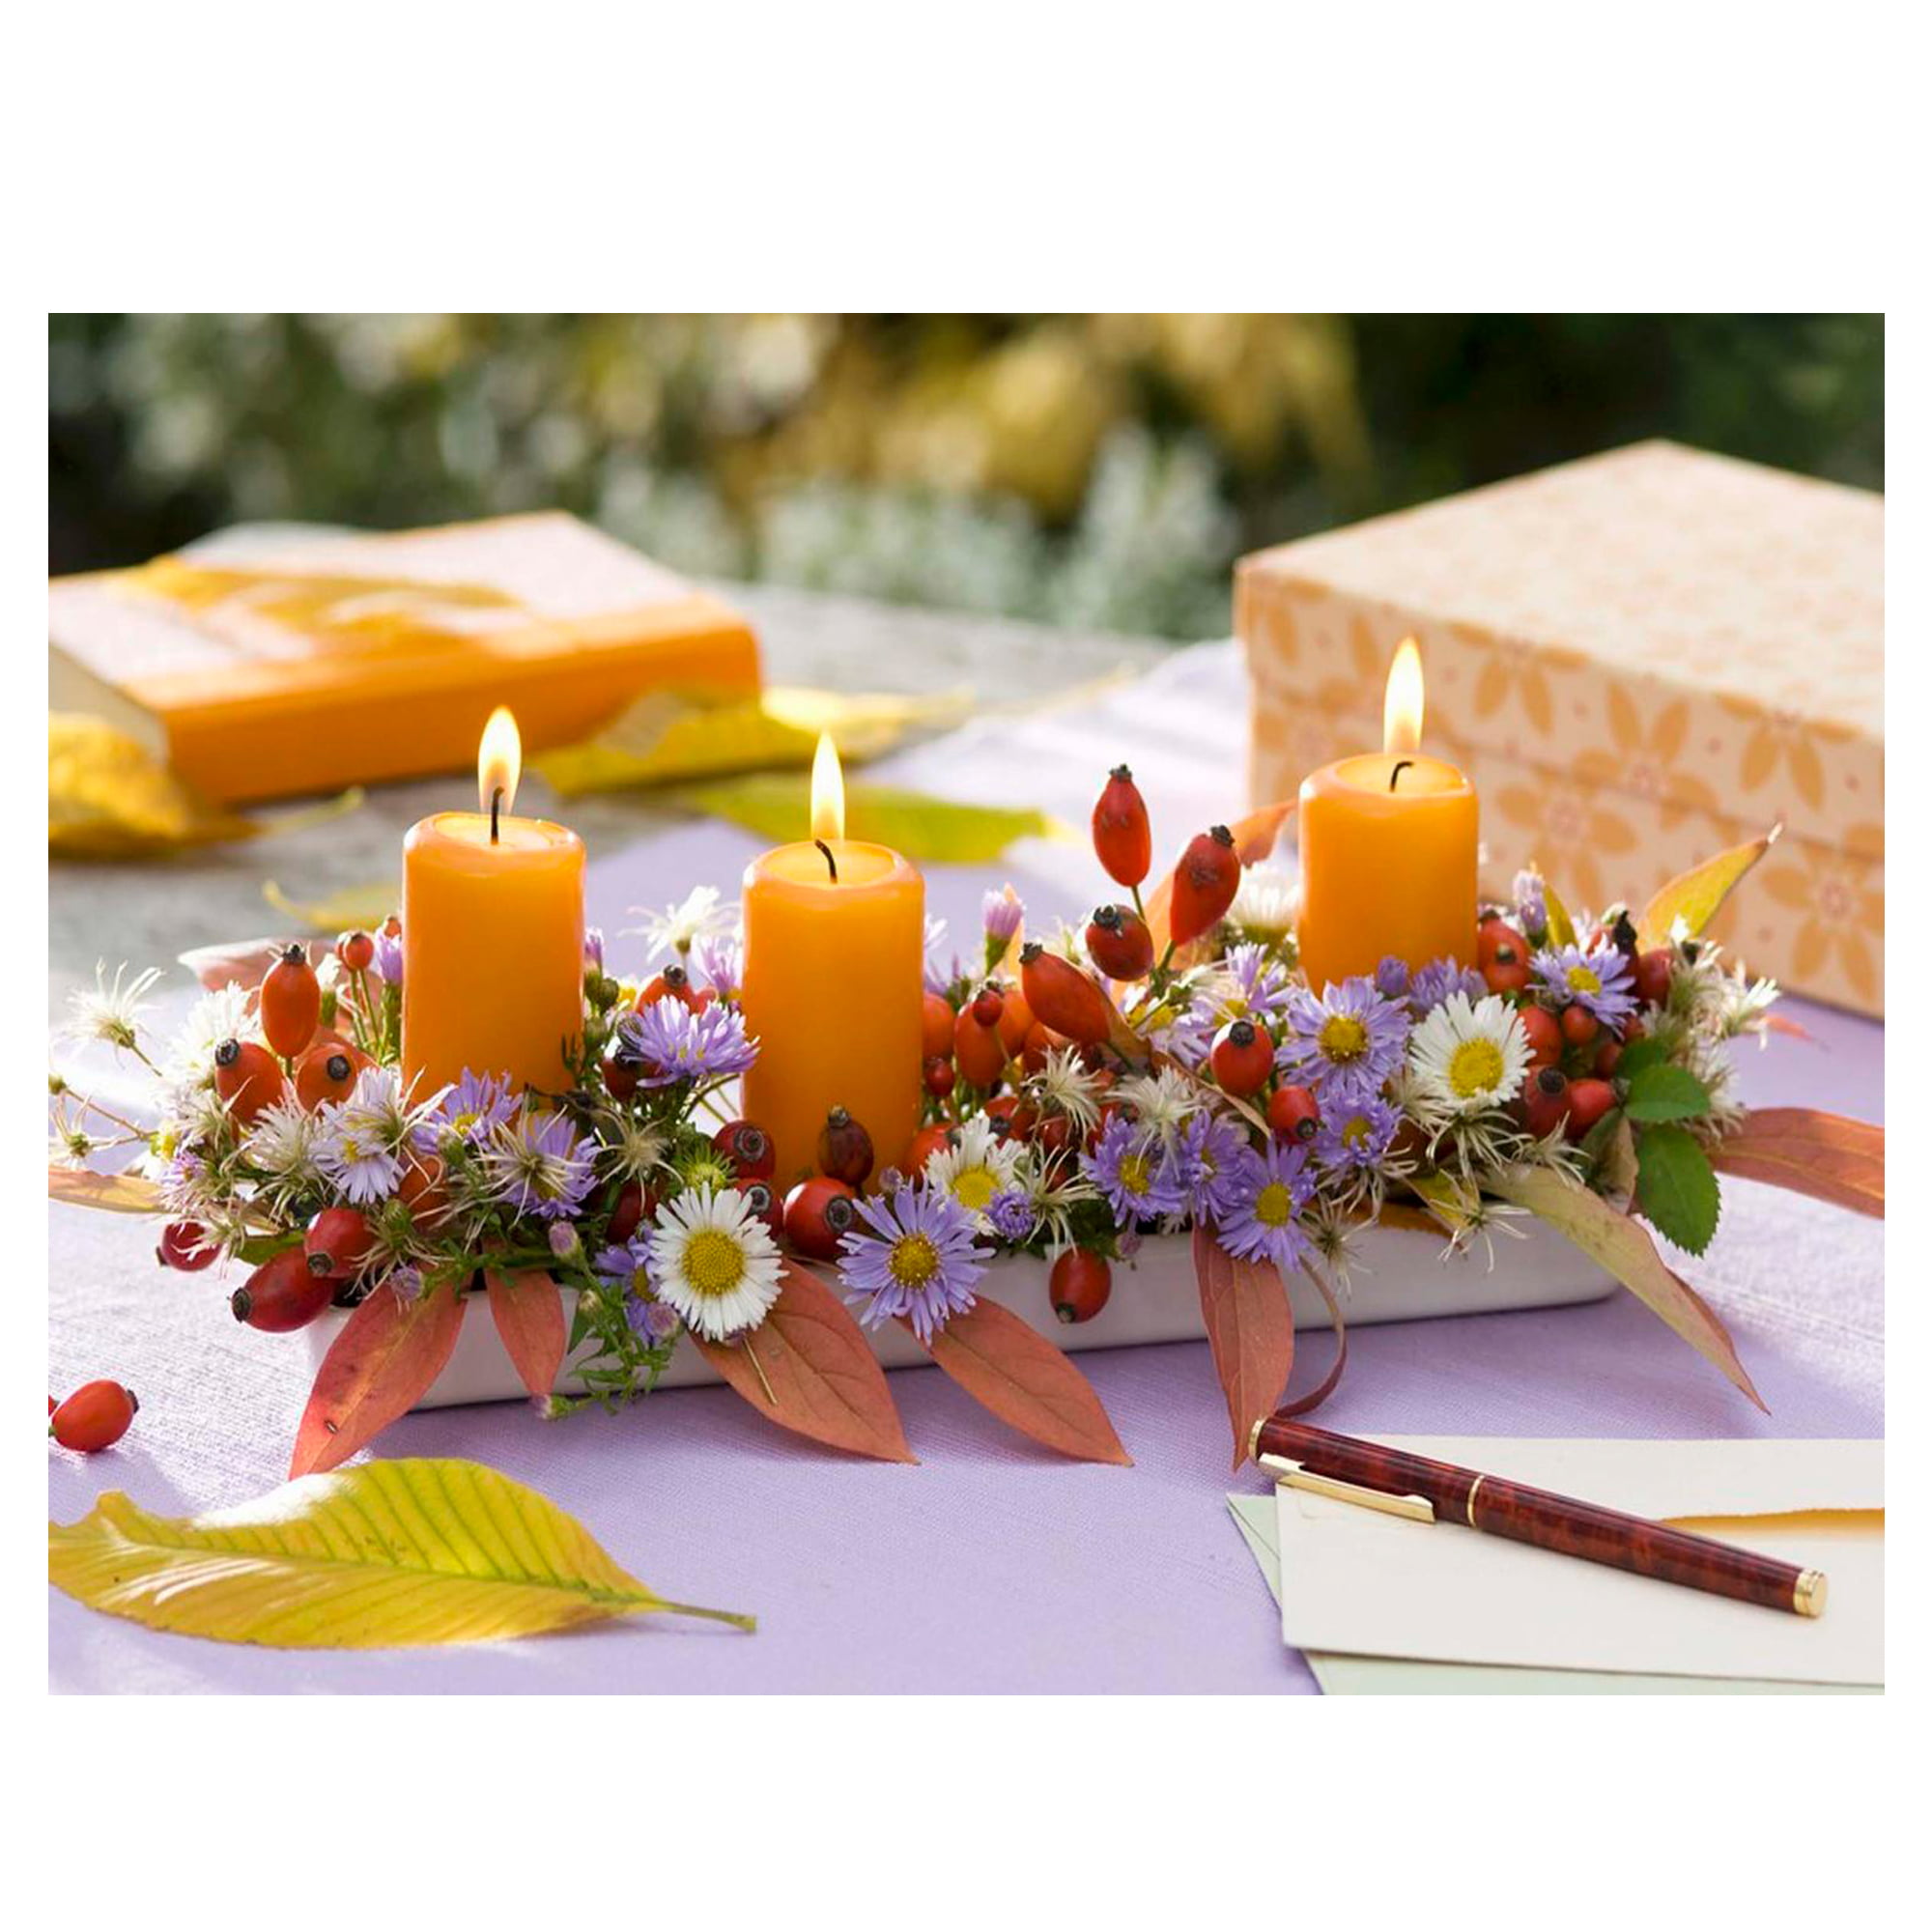 NEW 6 Amber Led Floating Floral Tea Light Candle for Wedding Centerpiece Decor 